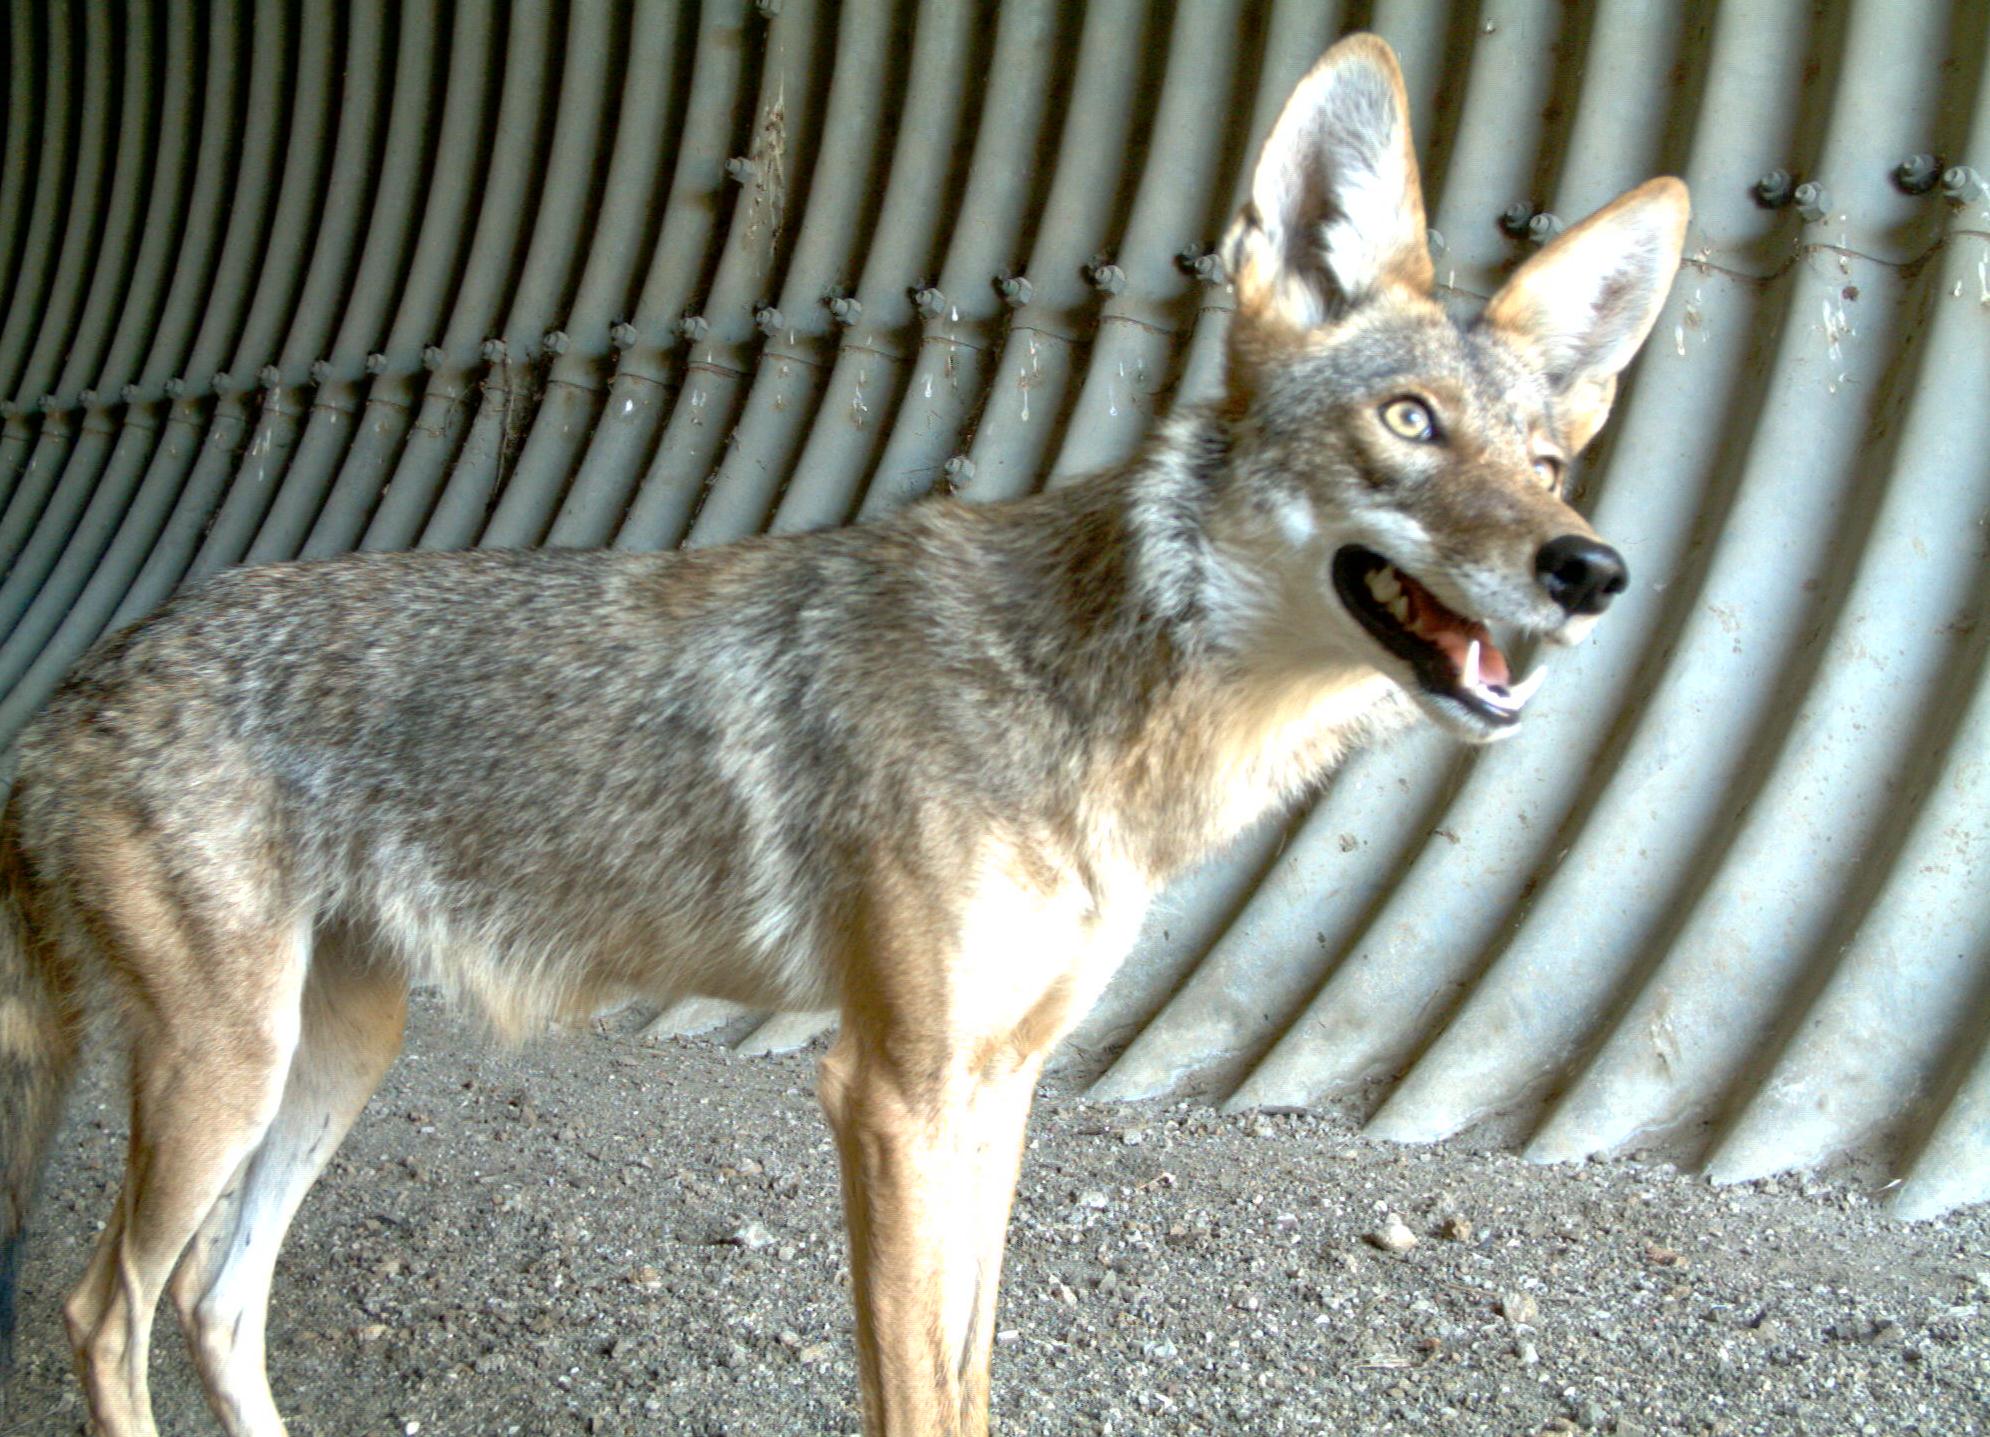 Coyote image captured by a remote wildlife camera used during the SR-23 study.